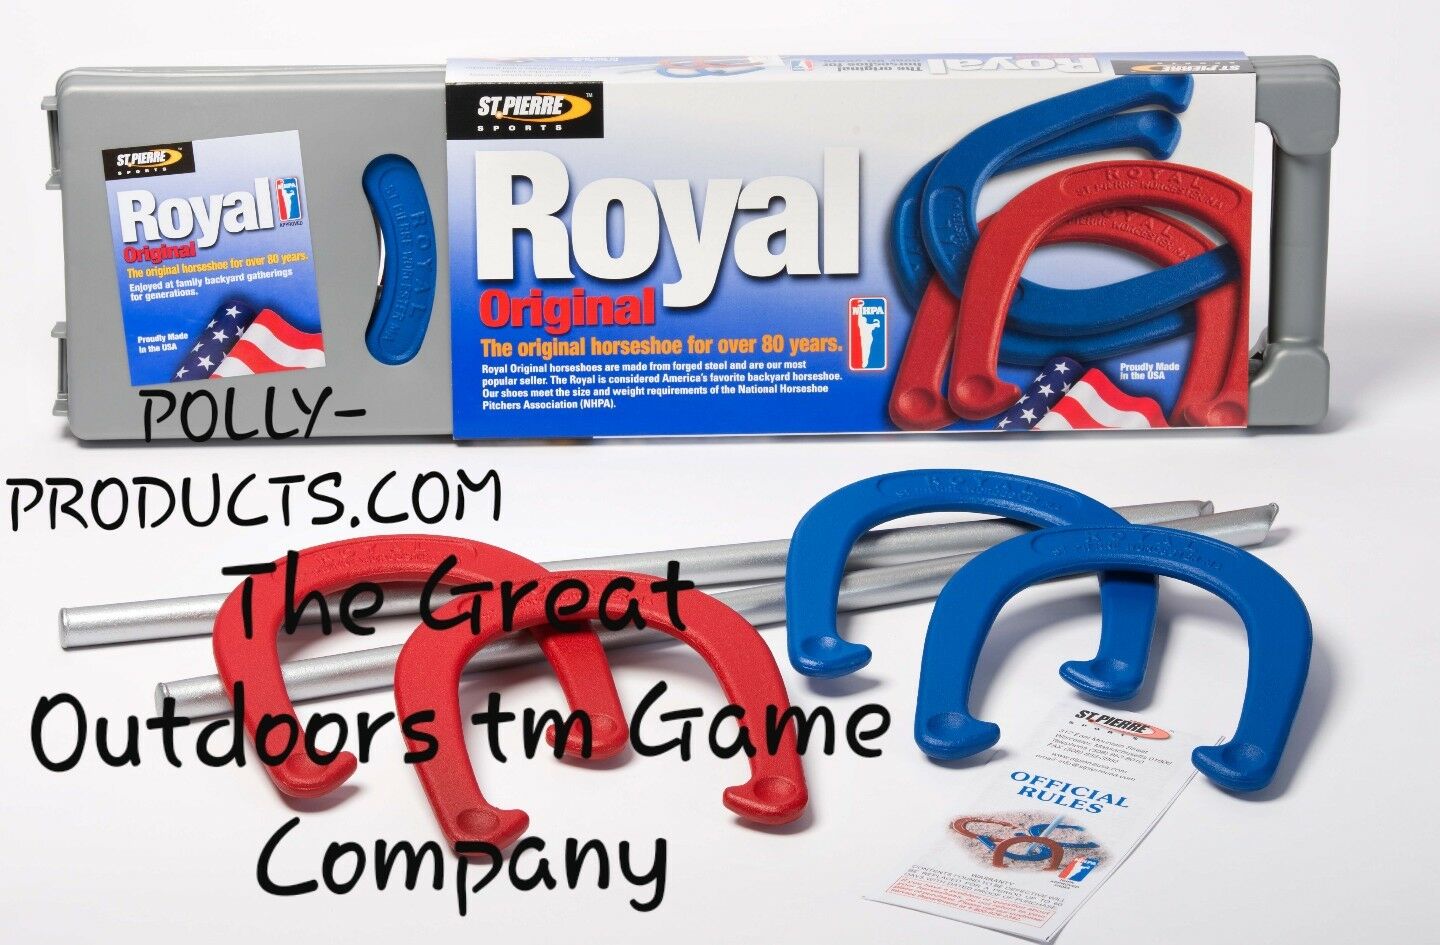 #H1BUS FROM POLLY PRODUCTS, THE GREAT OUTDOORS tm GAME COMPANY-USA QUALITY